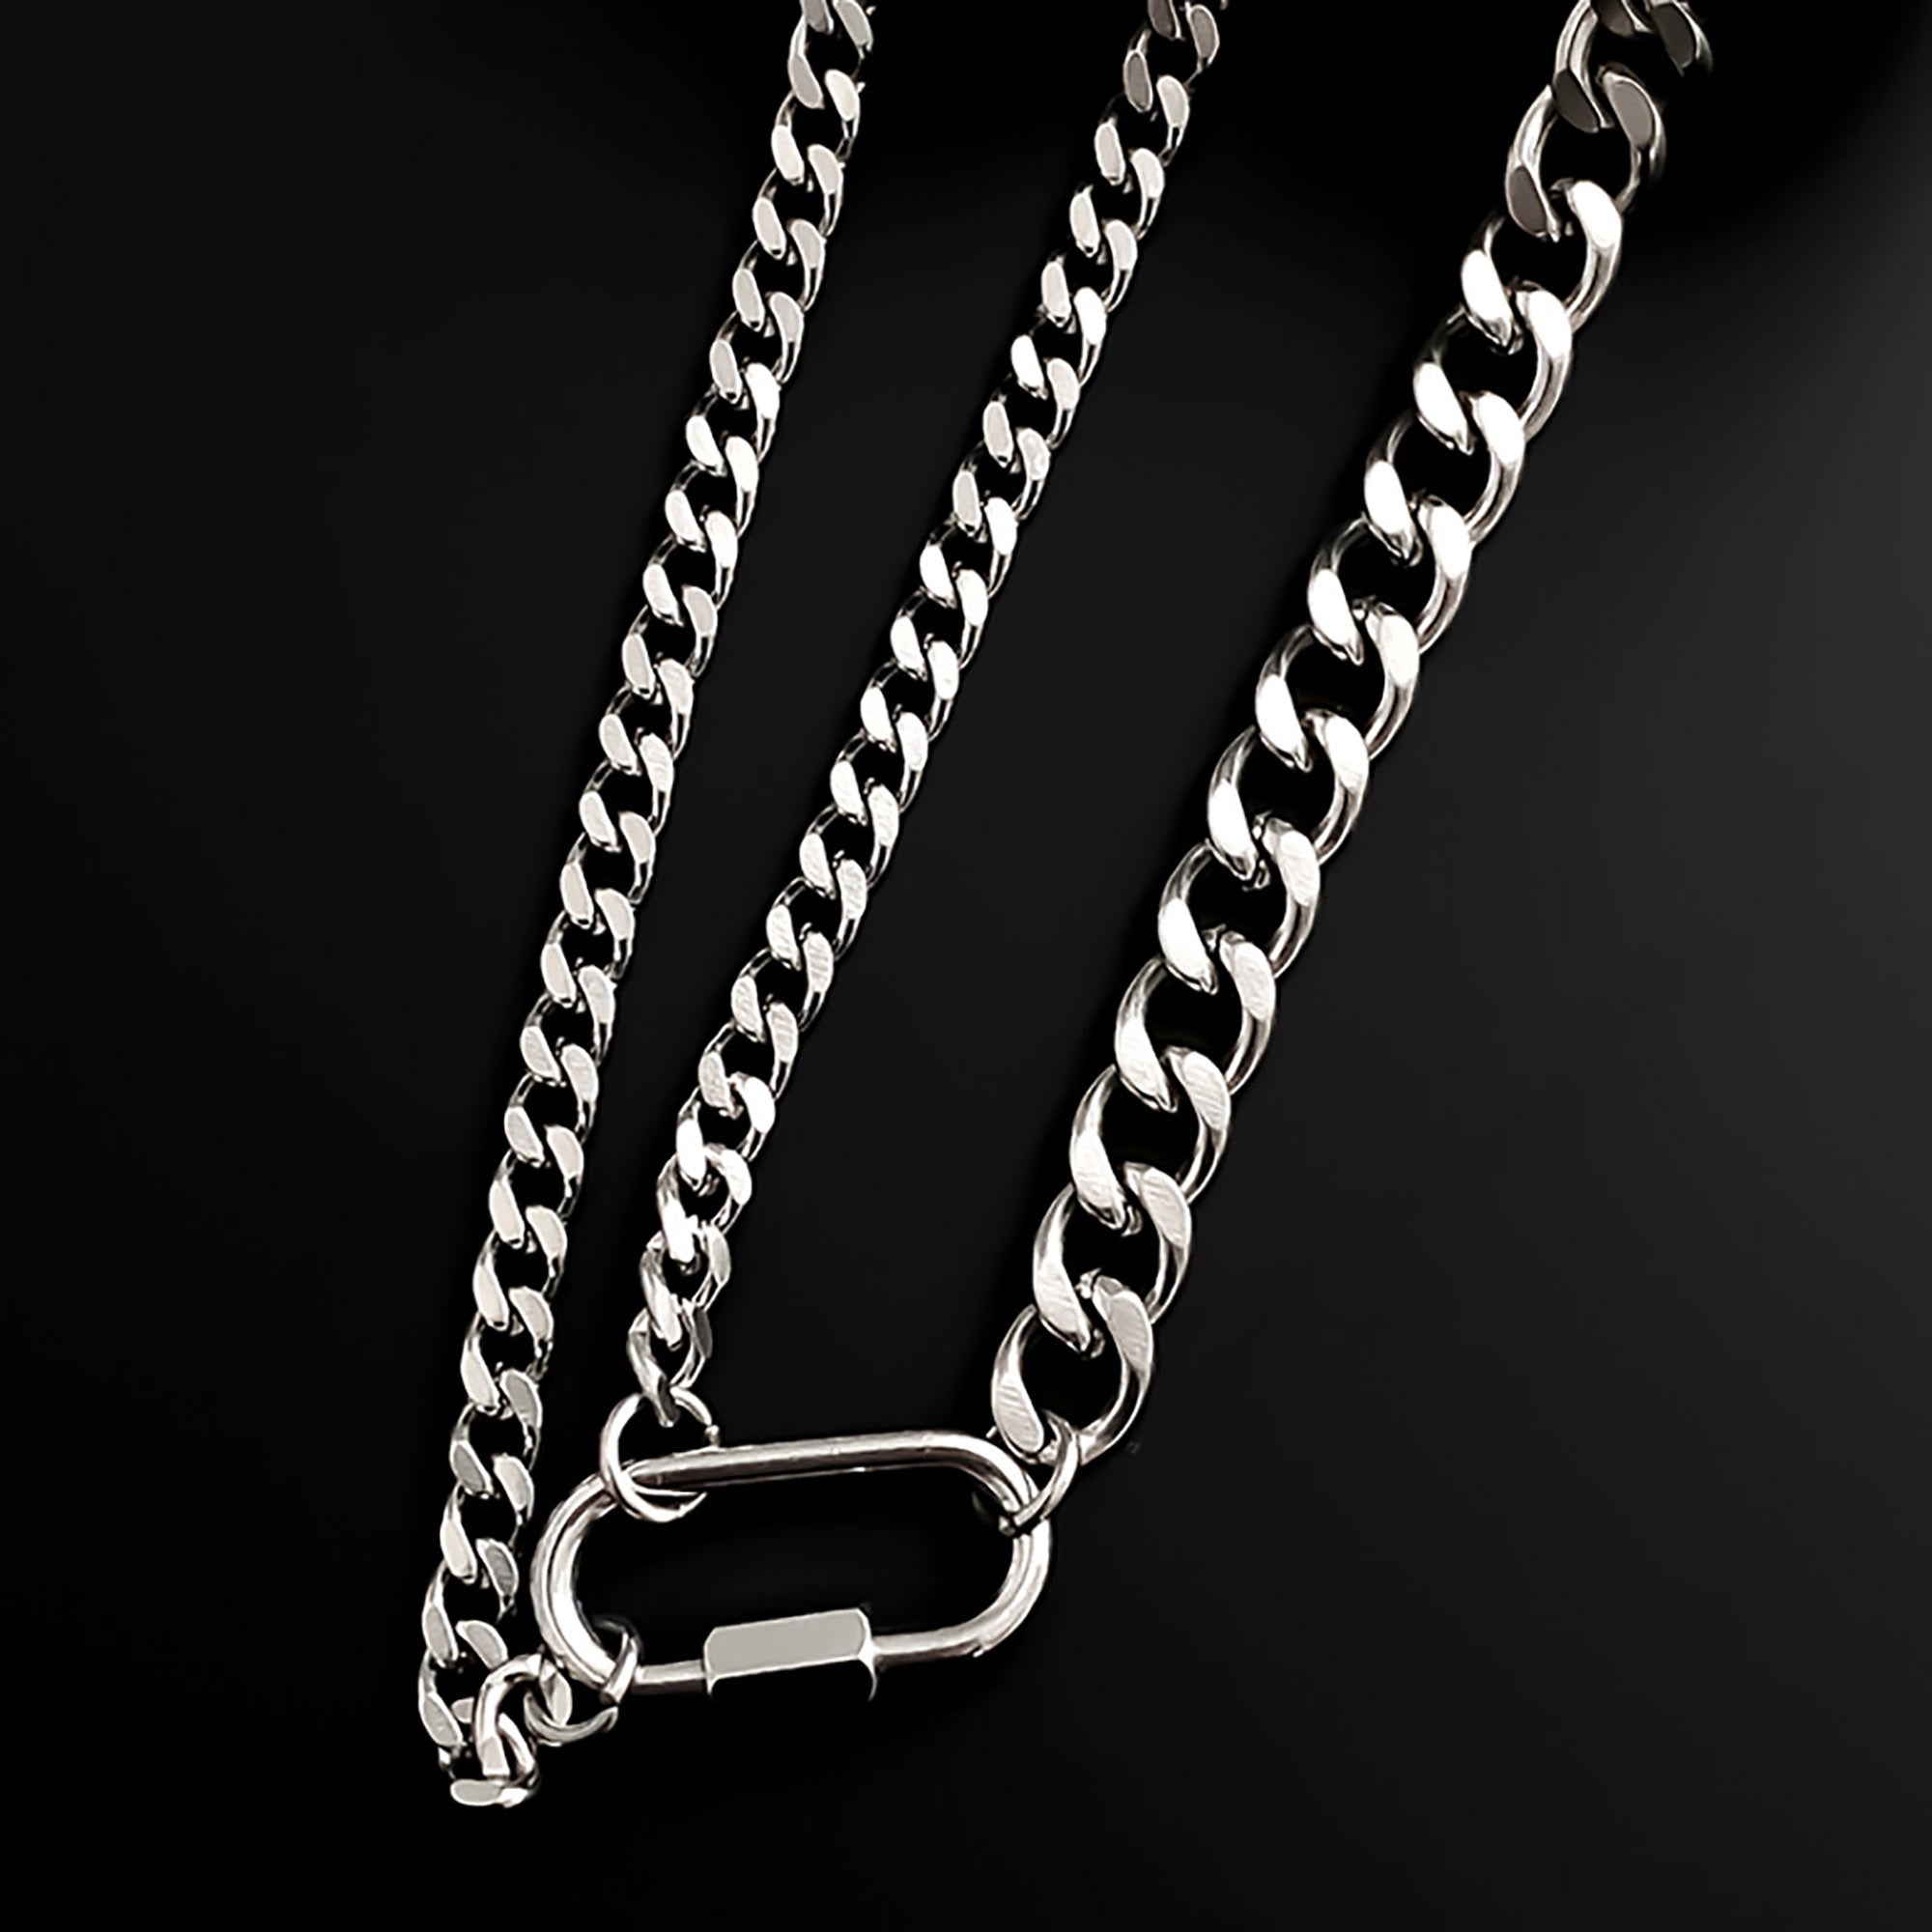 Stainless Steel 55cm w/ Buckle Layered Necklace Valentine Day Gift KOL / Youtuber / Celebrity / Fashion Icon styling